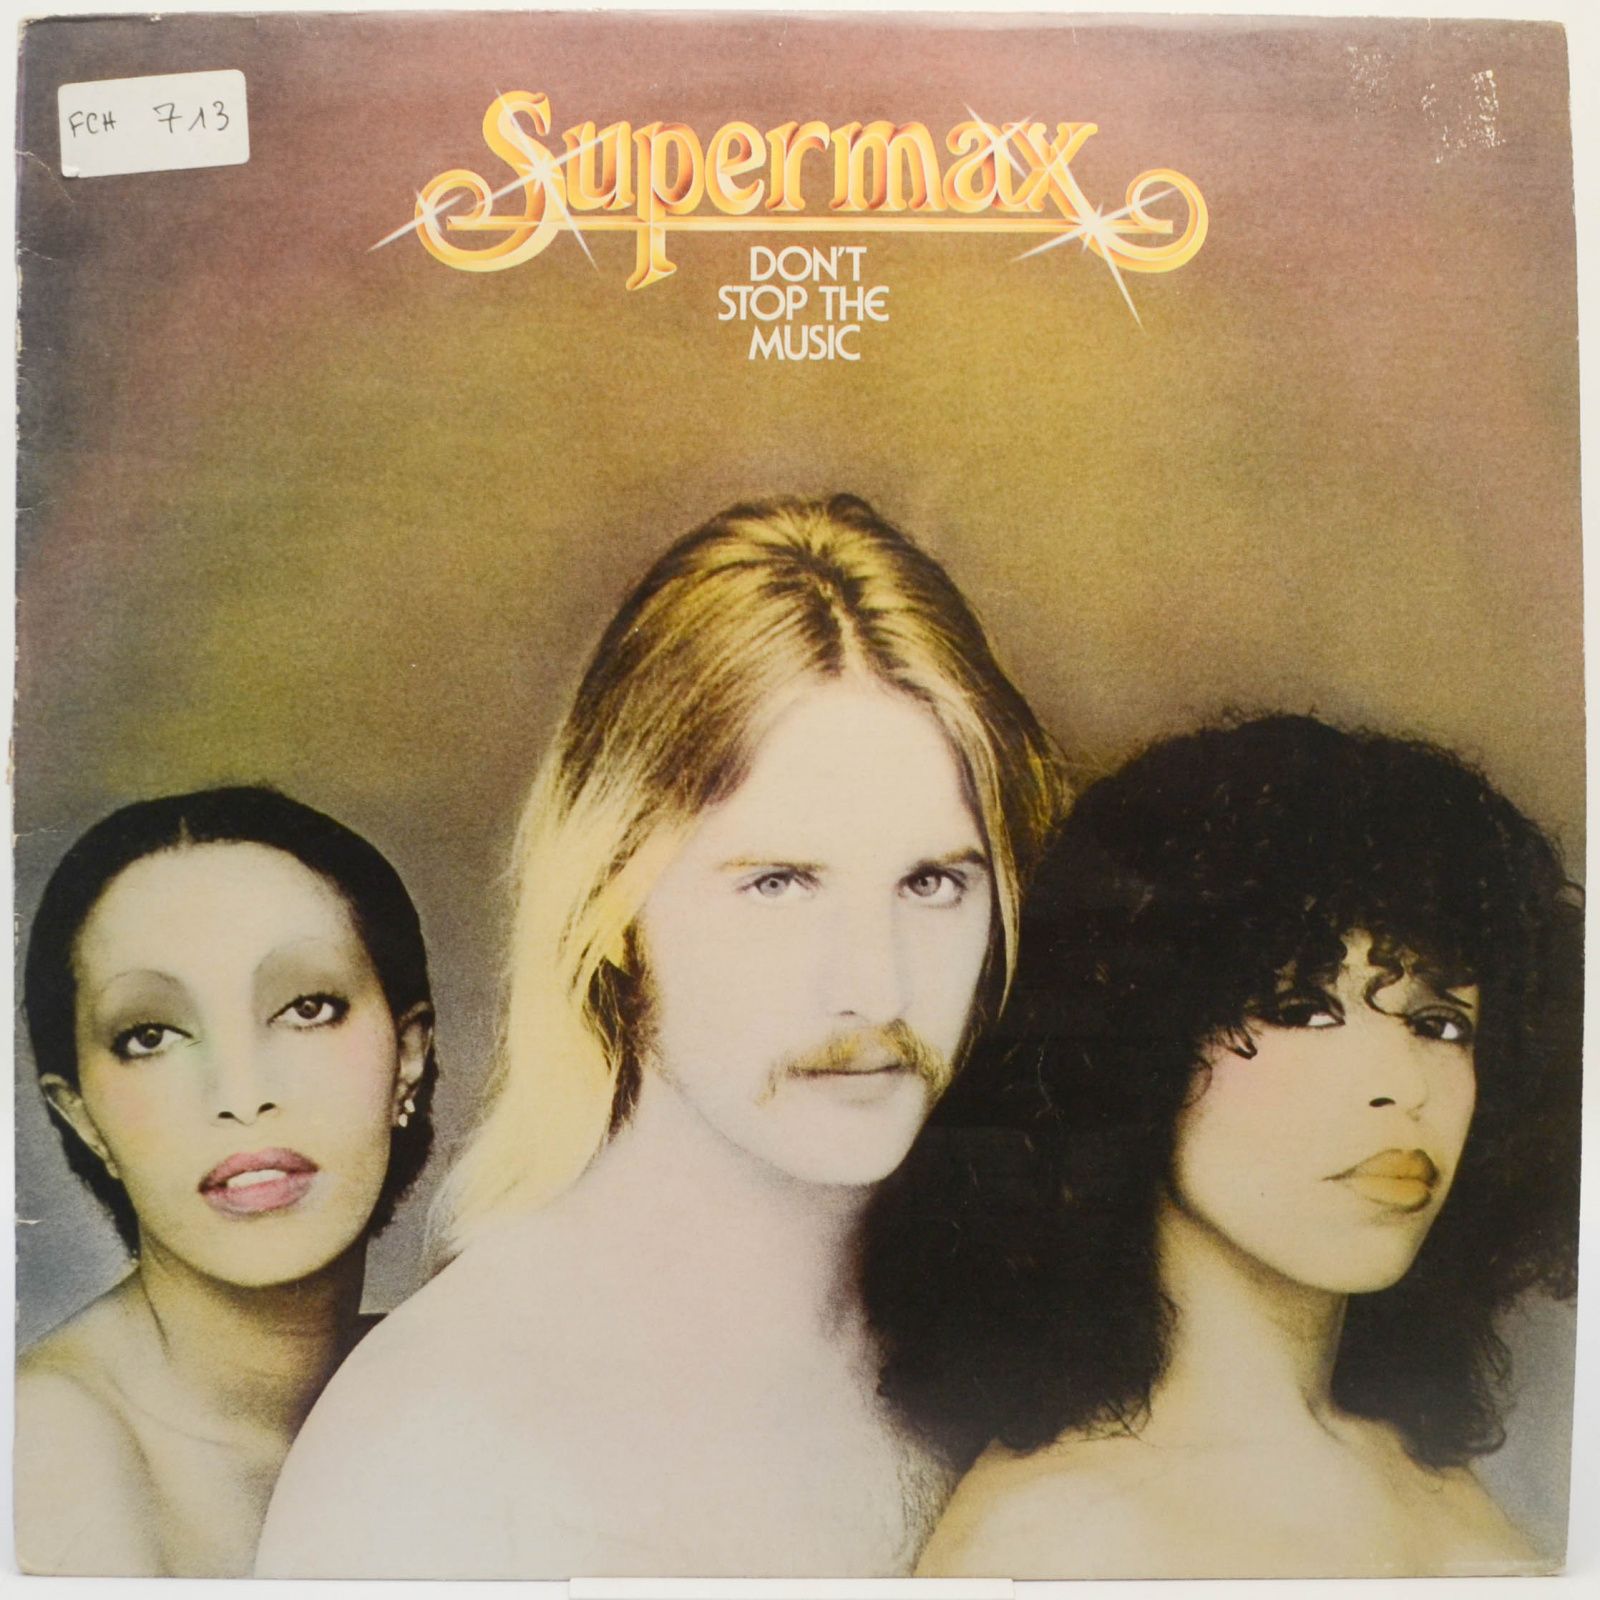 Supermax — Don't Stop The Music, 1977